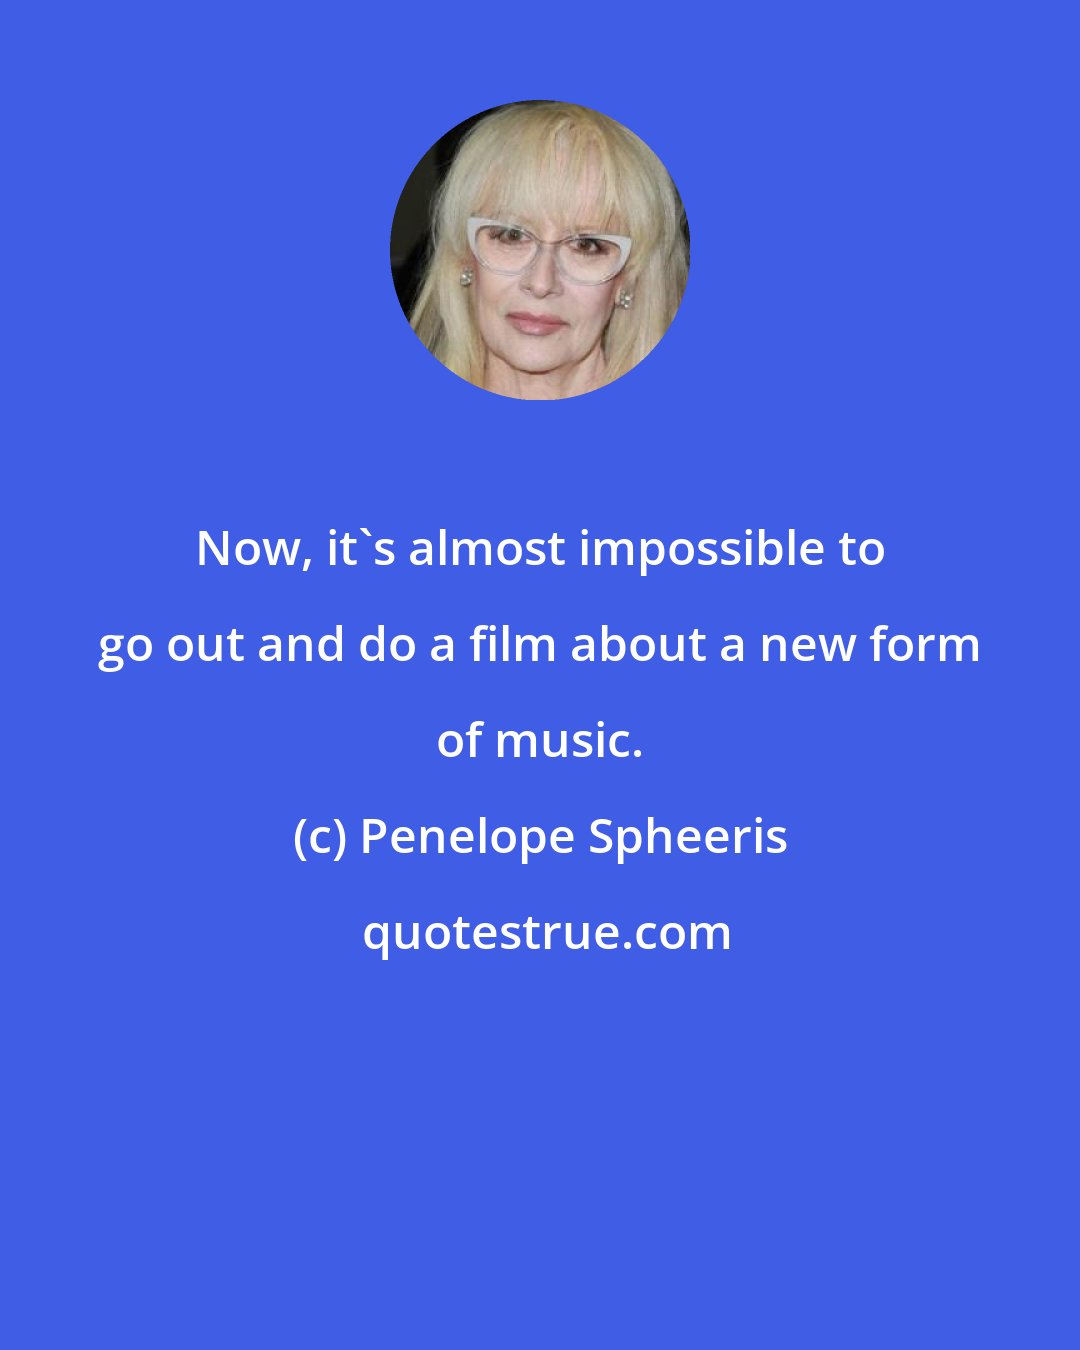 Penelope Spheeris: Now, it's almost impossible to go out and do a film about a new form of music.